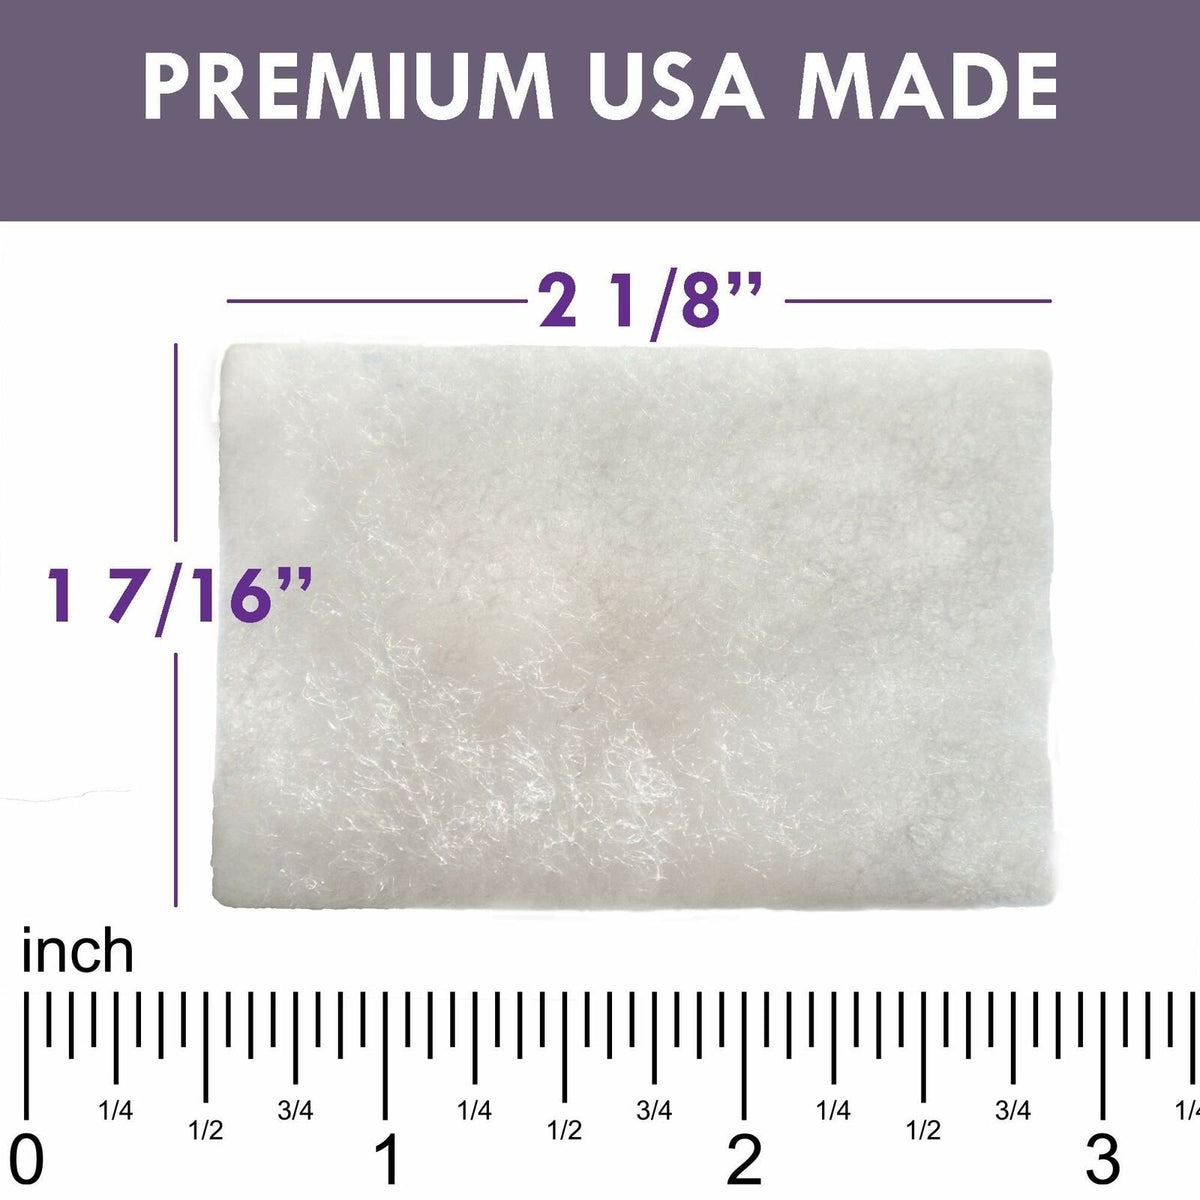 CPAP Filters Disposable Felt Pollen air Filter - 52 Pack 1 Year Supply - Made in The USA Standard Universal CPAP Filter Supplies - ResMed Airsense 10, Aircurve 10, S9 Series Machines by Mars Wellness - Mars Med Supply